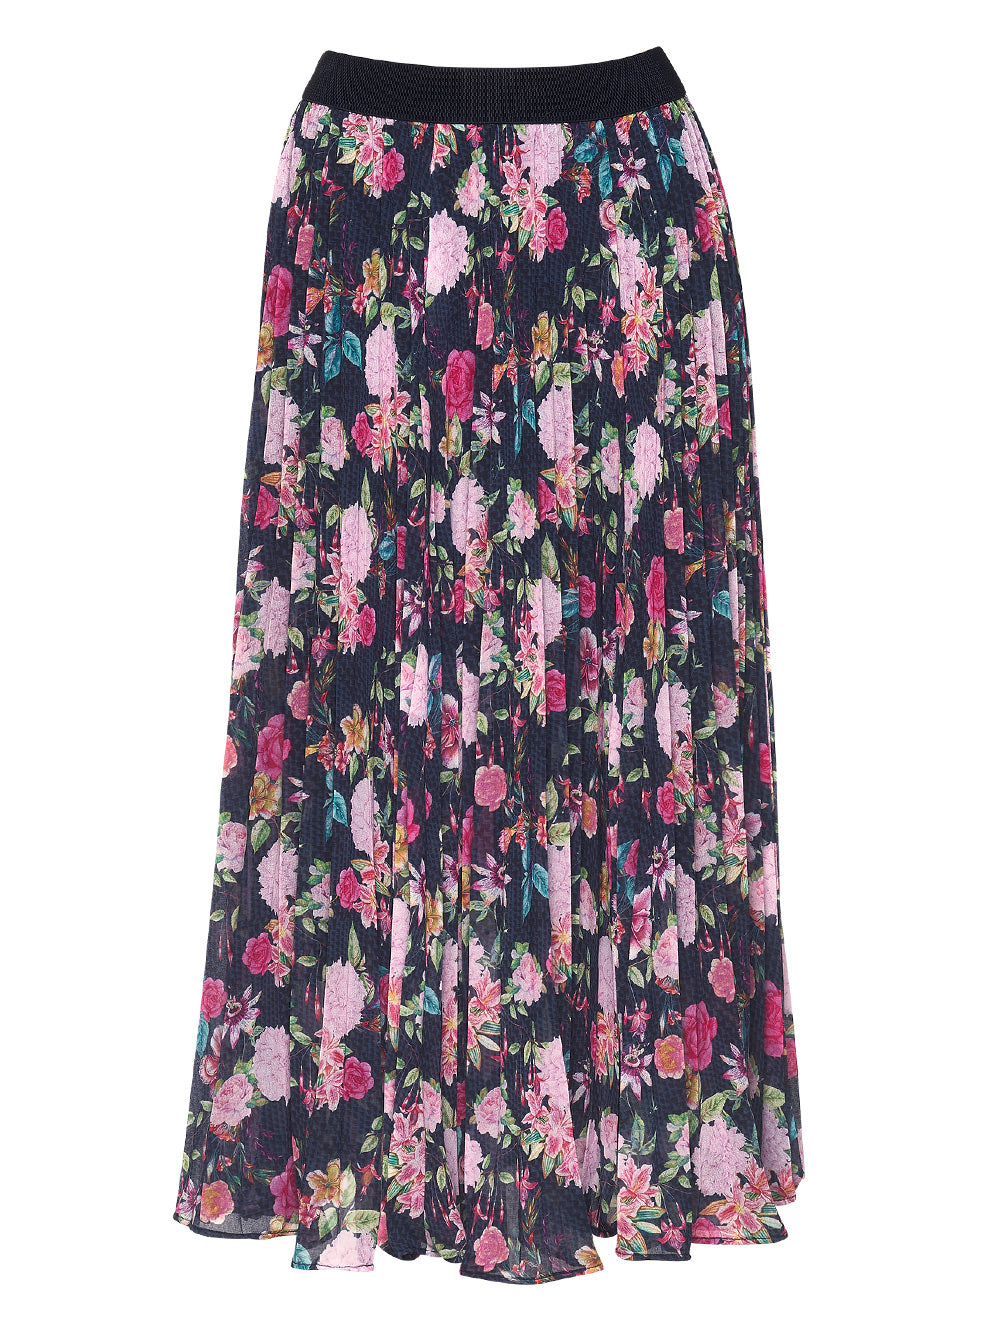 MADLY SWEETLY FUCHSIARISTIC PLEAT SKIRT